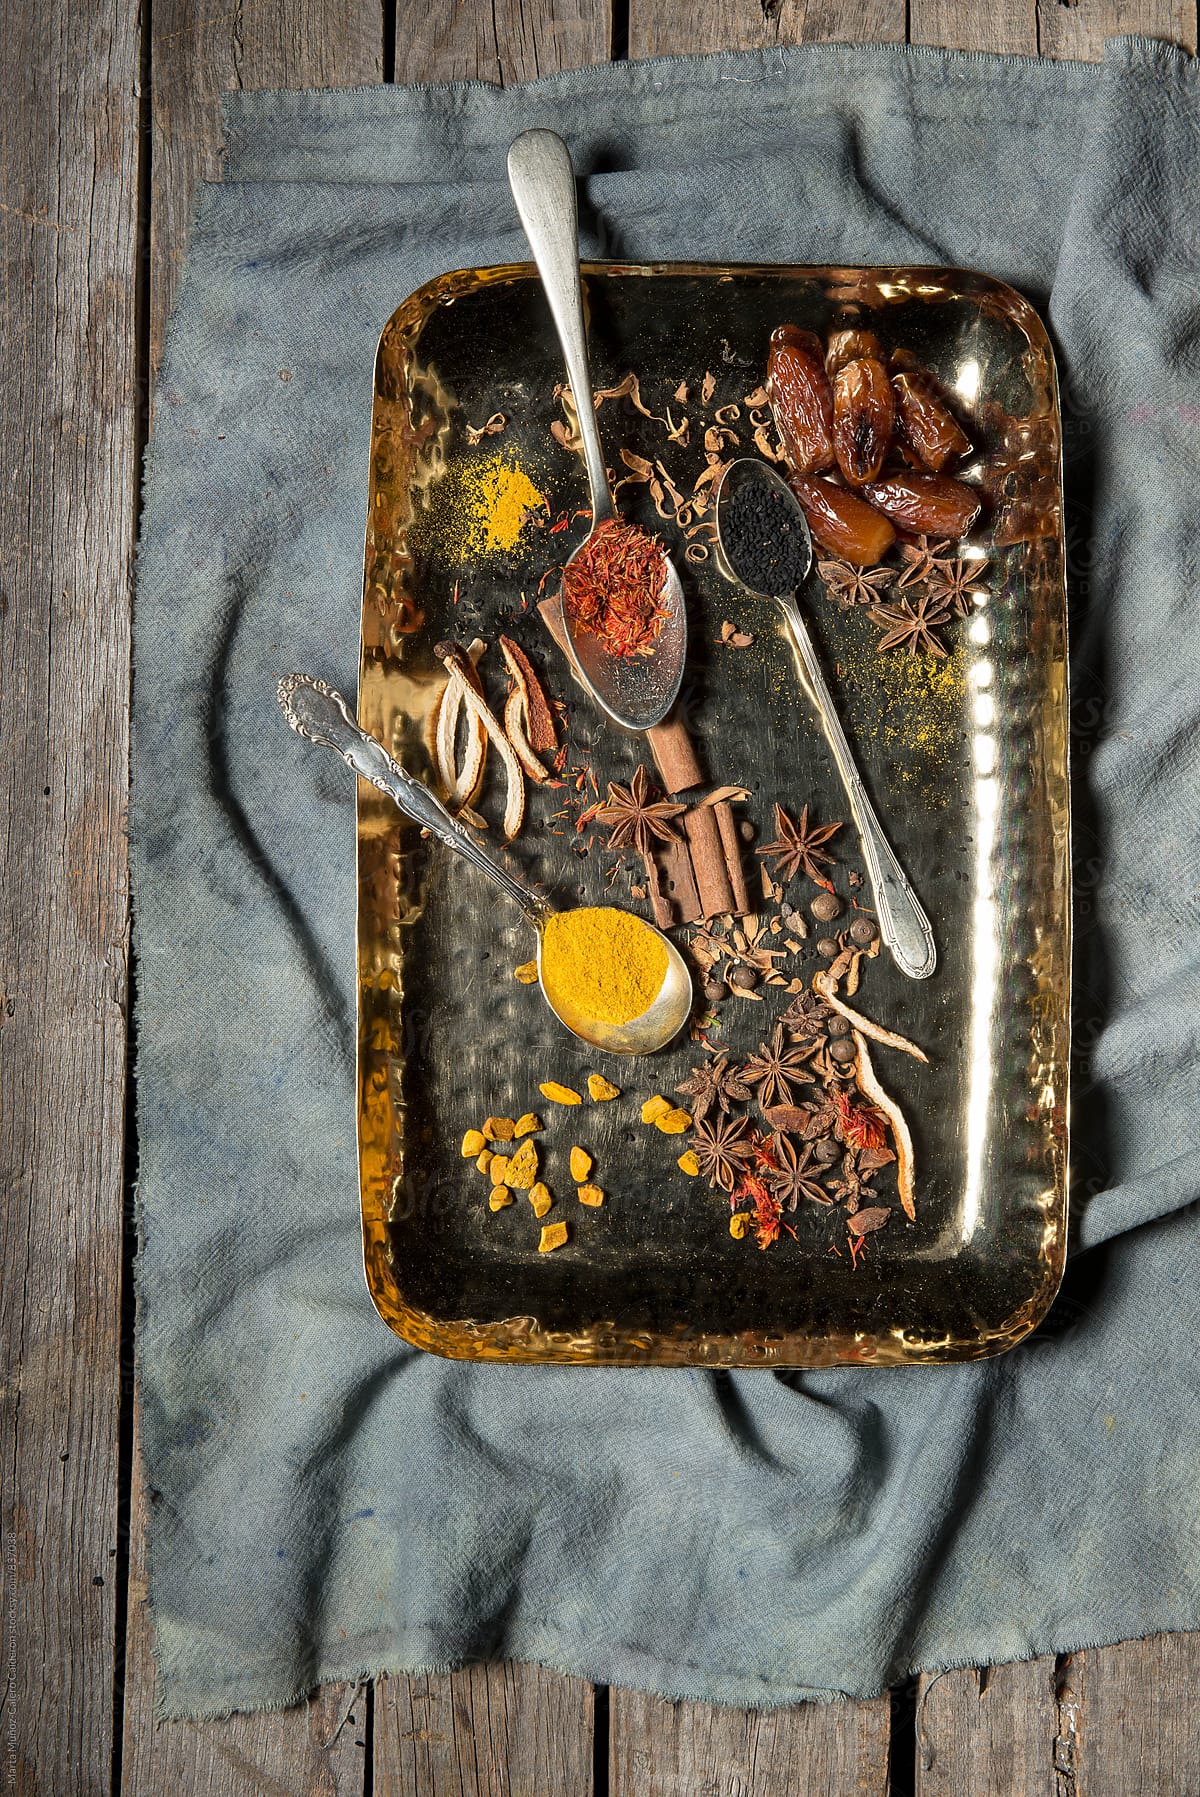 Several species on metal tray on a vintage piece of fabric with a  worn wood surface